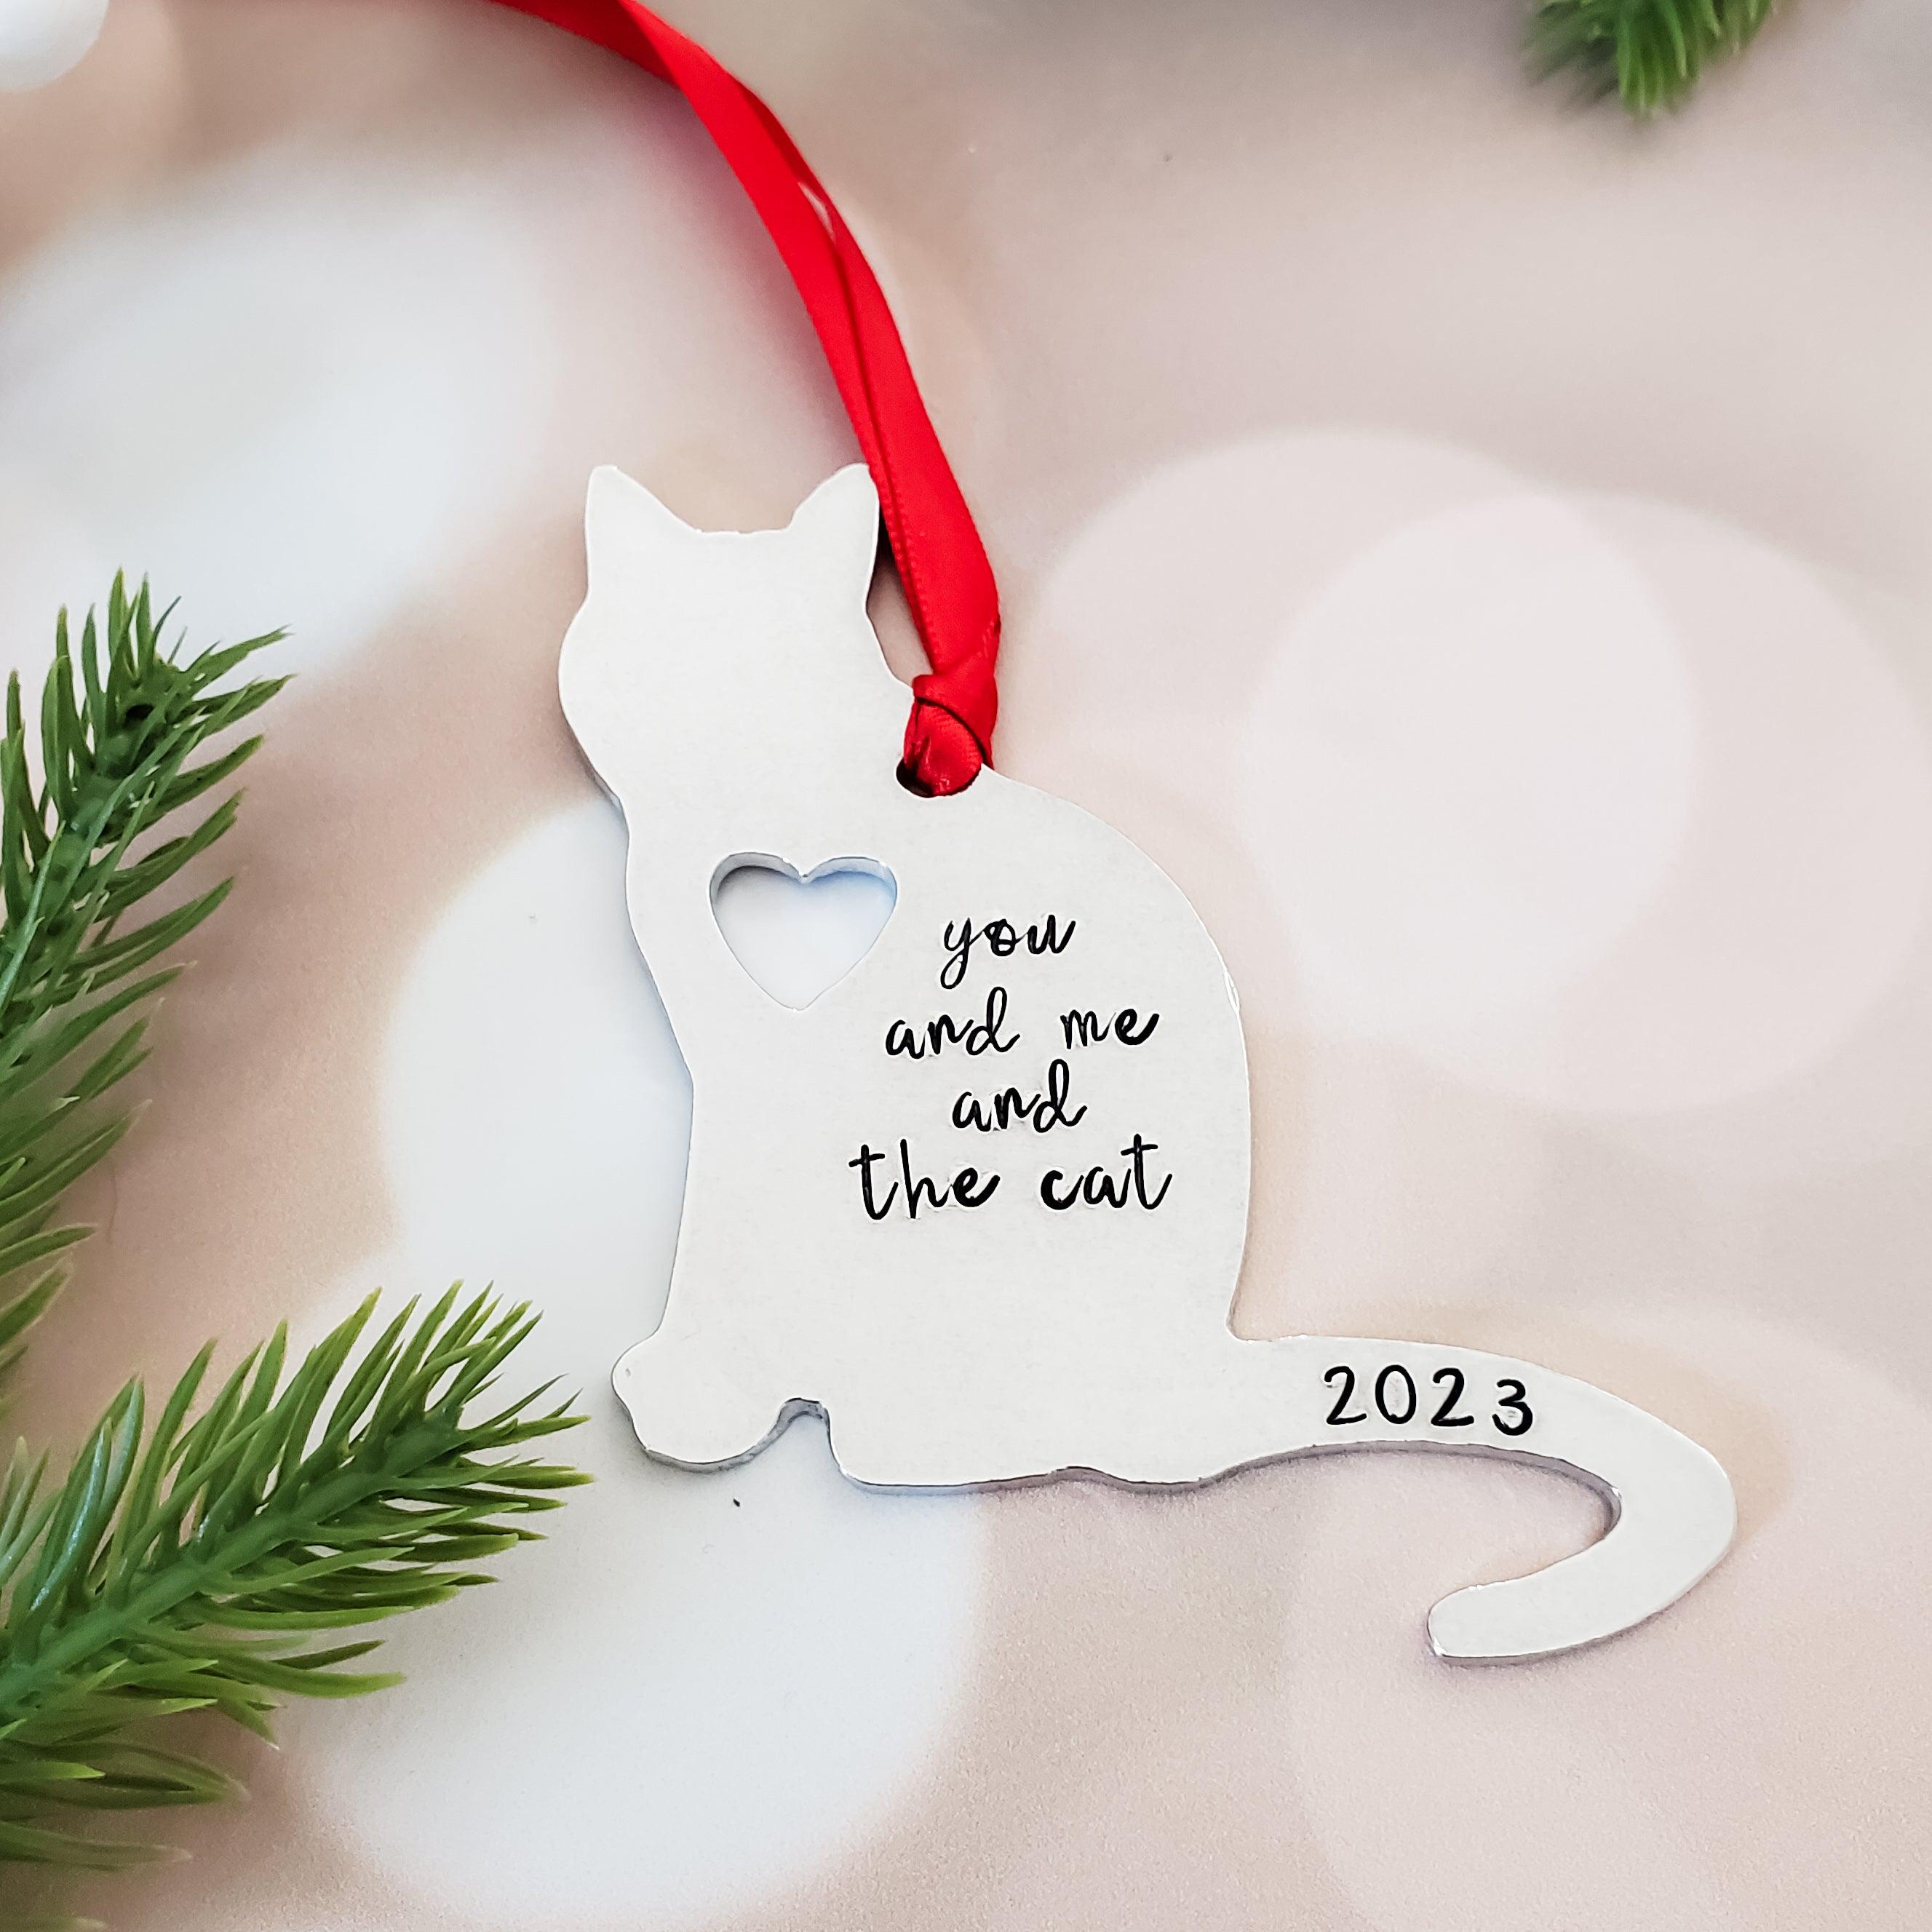 You and Me and the Cats Christmas Ornament Salt and Sparkle